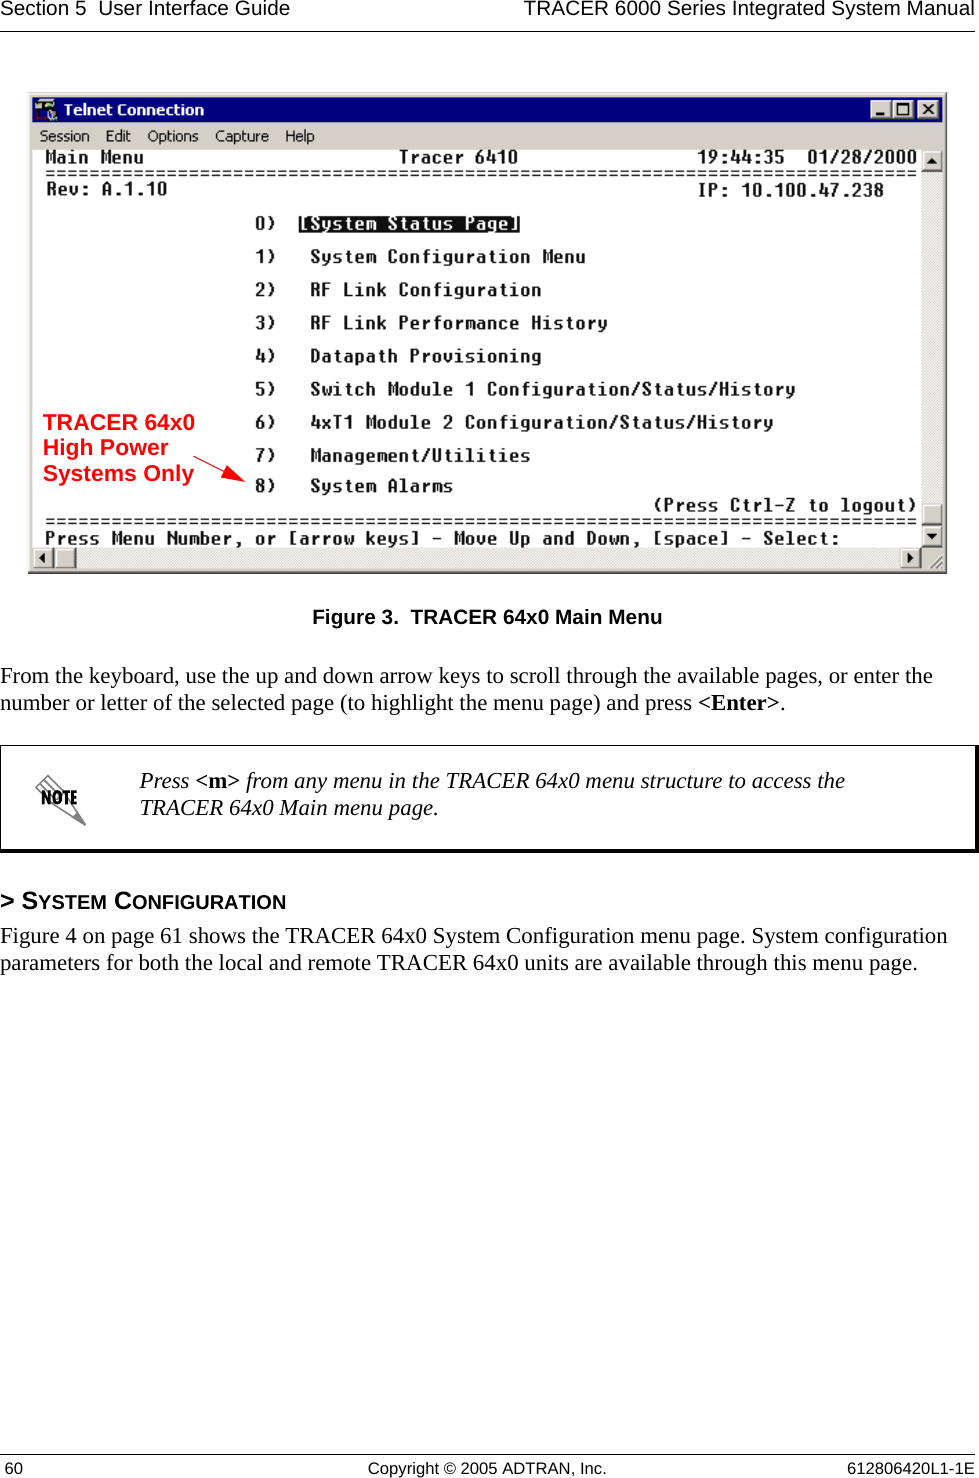 Section 5  User Interface Guide TRACER 6000 Series Integrated System Manual 60 Copyright © 2005 ADTRAN, Inc. 612806420L1-1EFigure 3.  TRACER 64x0 Main MenuFrom the keyboard, use the up and down arrow keys to scroll through the available pages, or enter the number or letter of the selected page (to highlight the menu page) and press &lt;Enter&gt;.&gt; SYSTEM CONFIGURATIONFigure 4 on page 61 shows the TRACER 64x0 System Configuration menu page. System configuration parameters for both the local and remote TRACER 64x0 units are available through this menu page.Press &lt;m&gt; from any menu in the TRACER 64x0 menu structure to access the TRACER 64x0 Main menu page.TRACER 64x0High PowerSystems Only